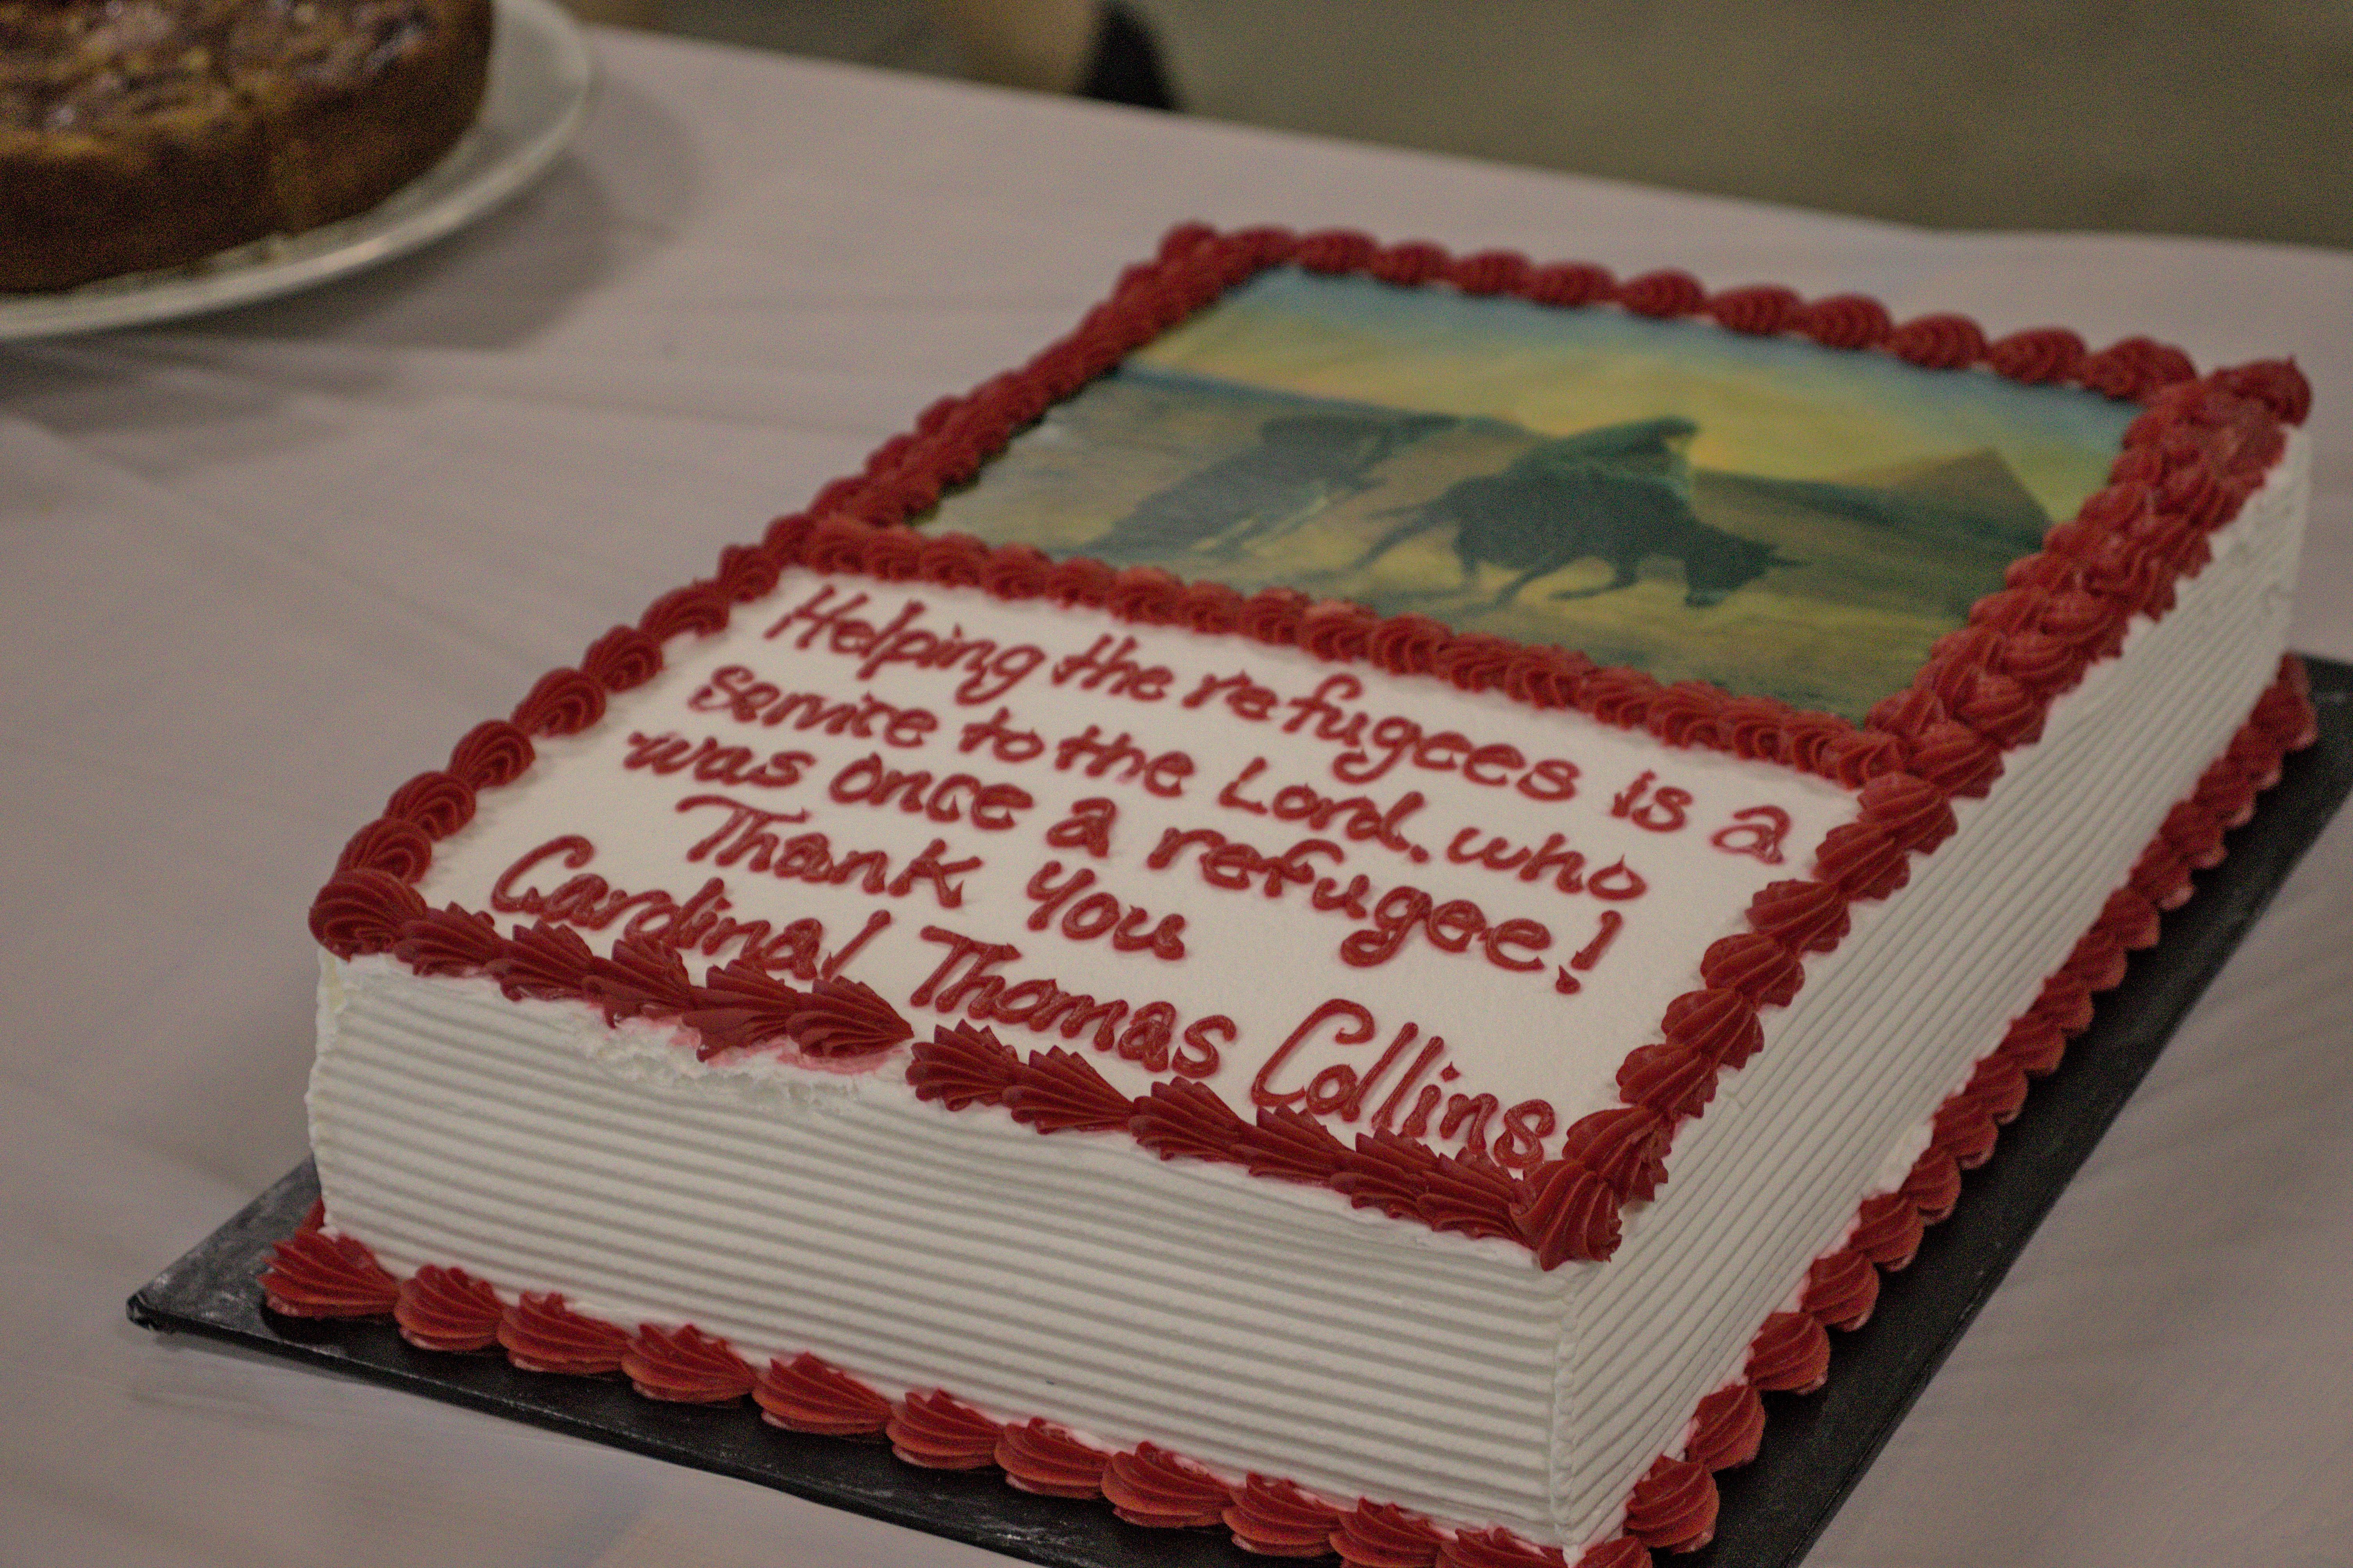 Photo of a cake thanking Cardinal Collins for helping refugees